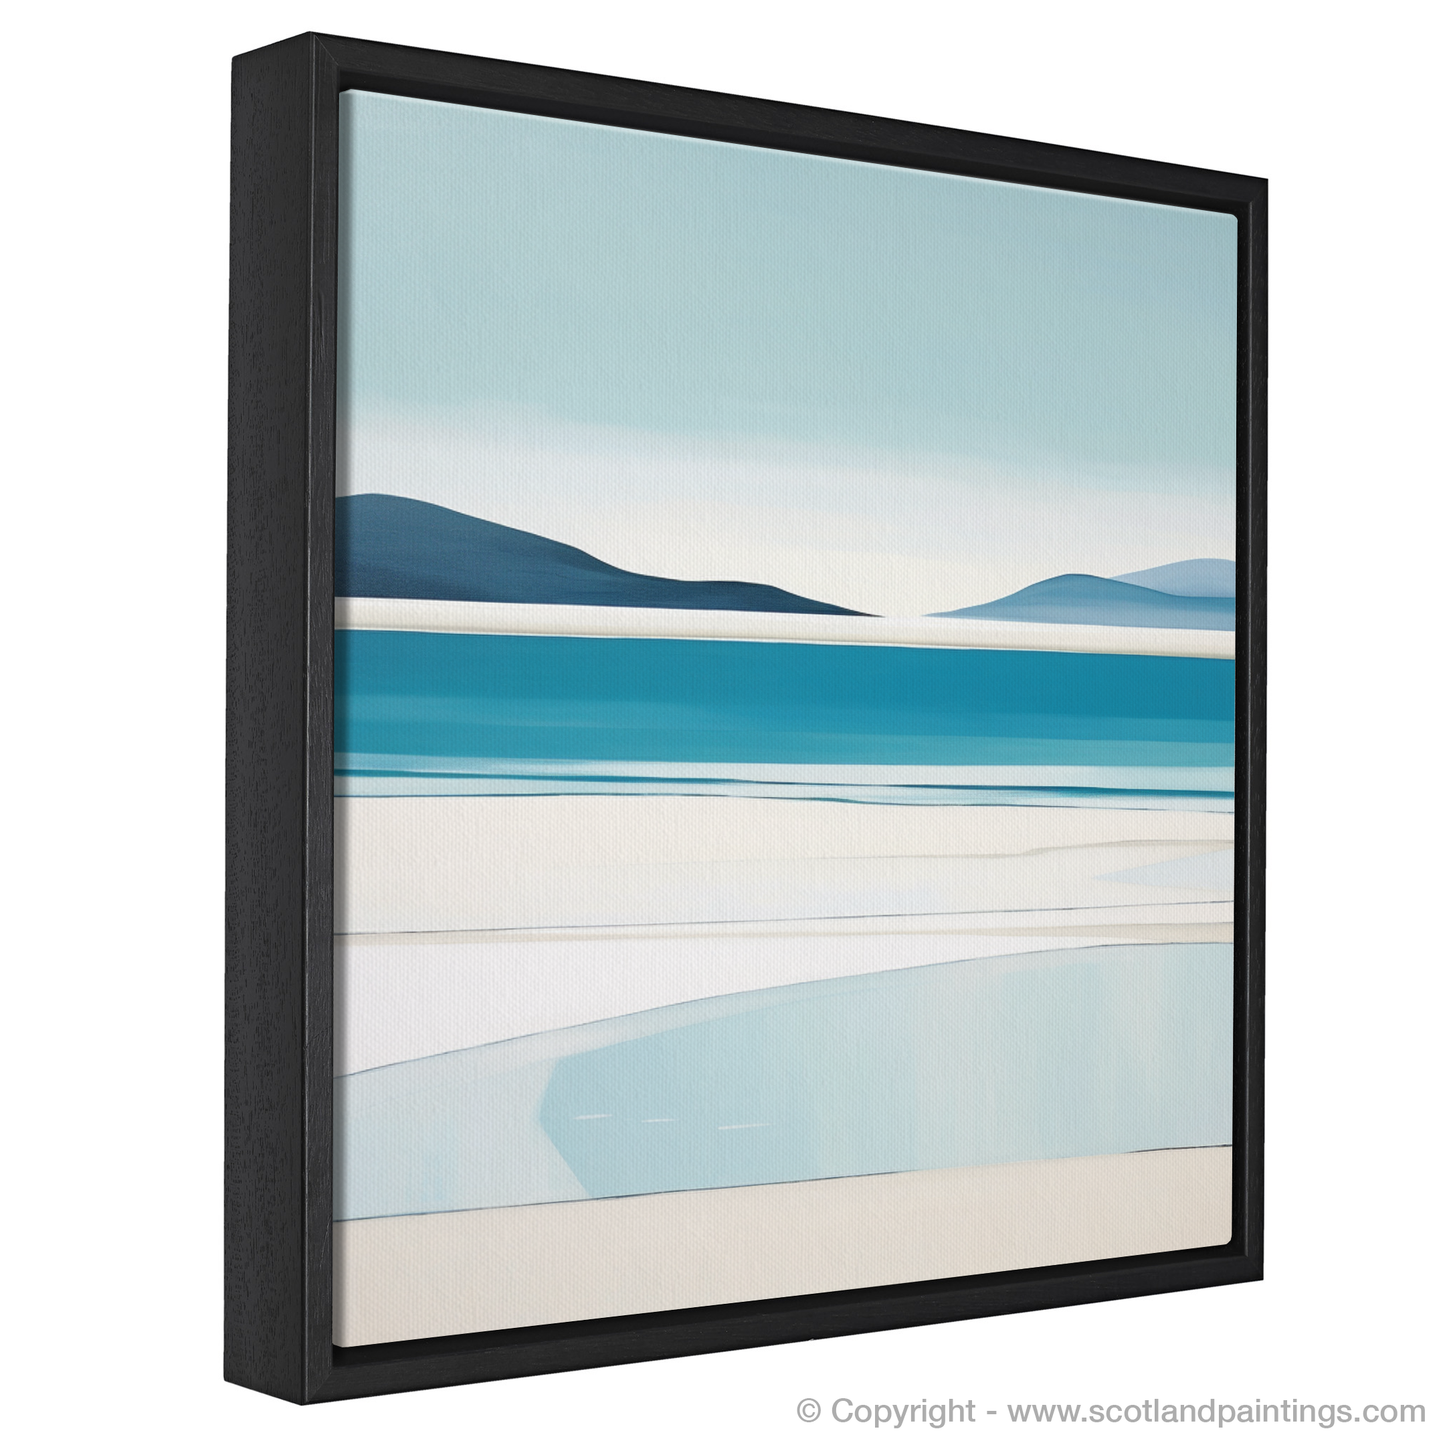 Painting and Art Print of Luskentyre Beach, Isle of Harris entitled "Serene Shores of Luskentyre: A Minimalist Ode to Scottish Beaches".